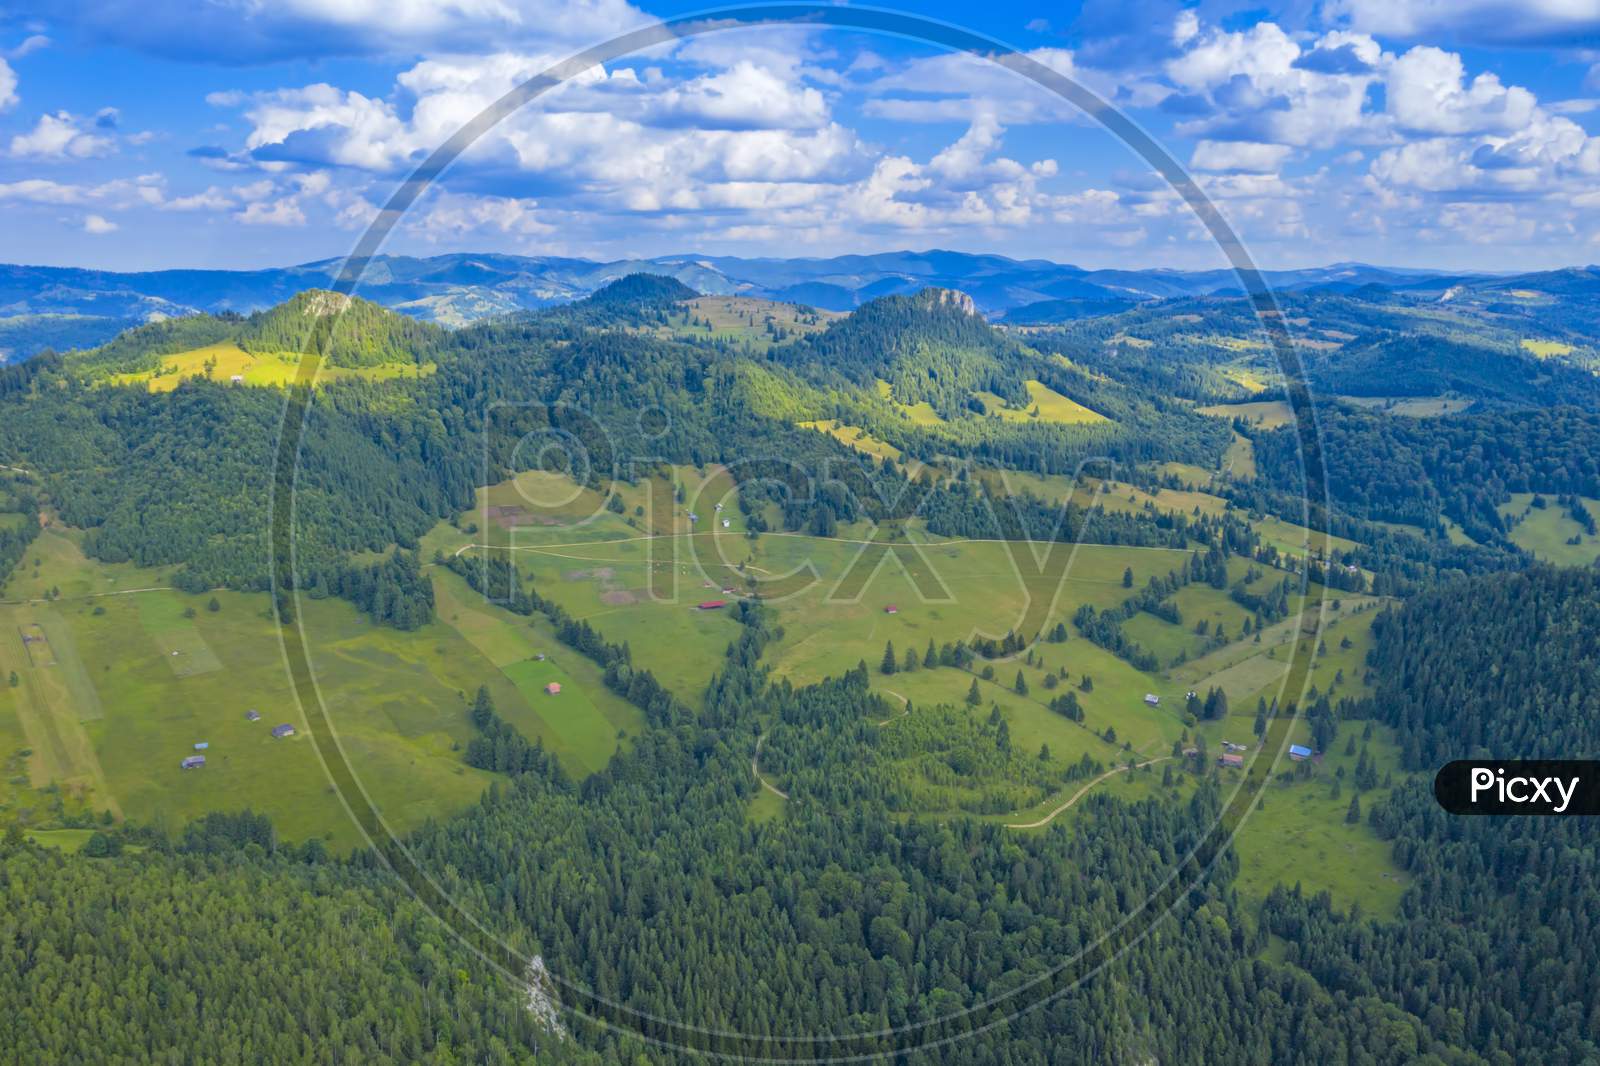 Aerial Mountain Pasture In A Summer Landscape